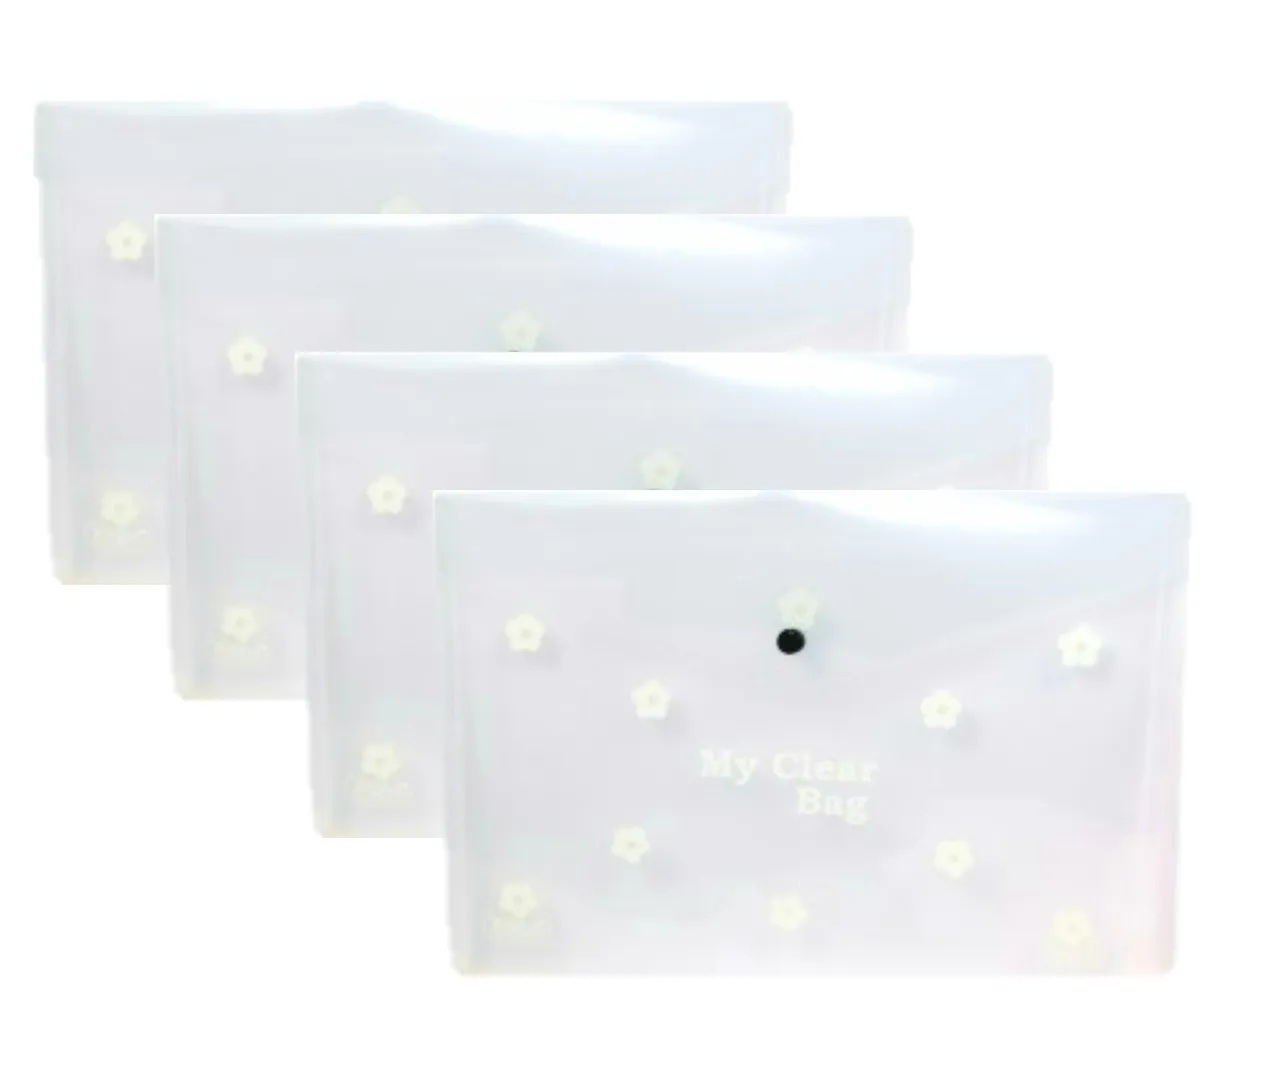 Saya My Clear Bag Flower, SY- 209F 1 Button Folder, 35.5X 25.5 cm, Pack of 4 , White Color